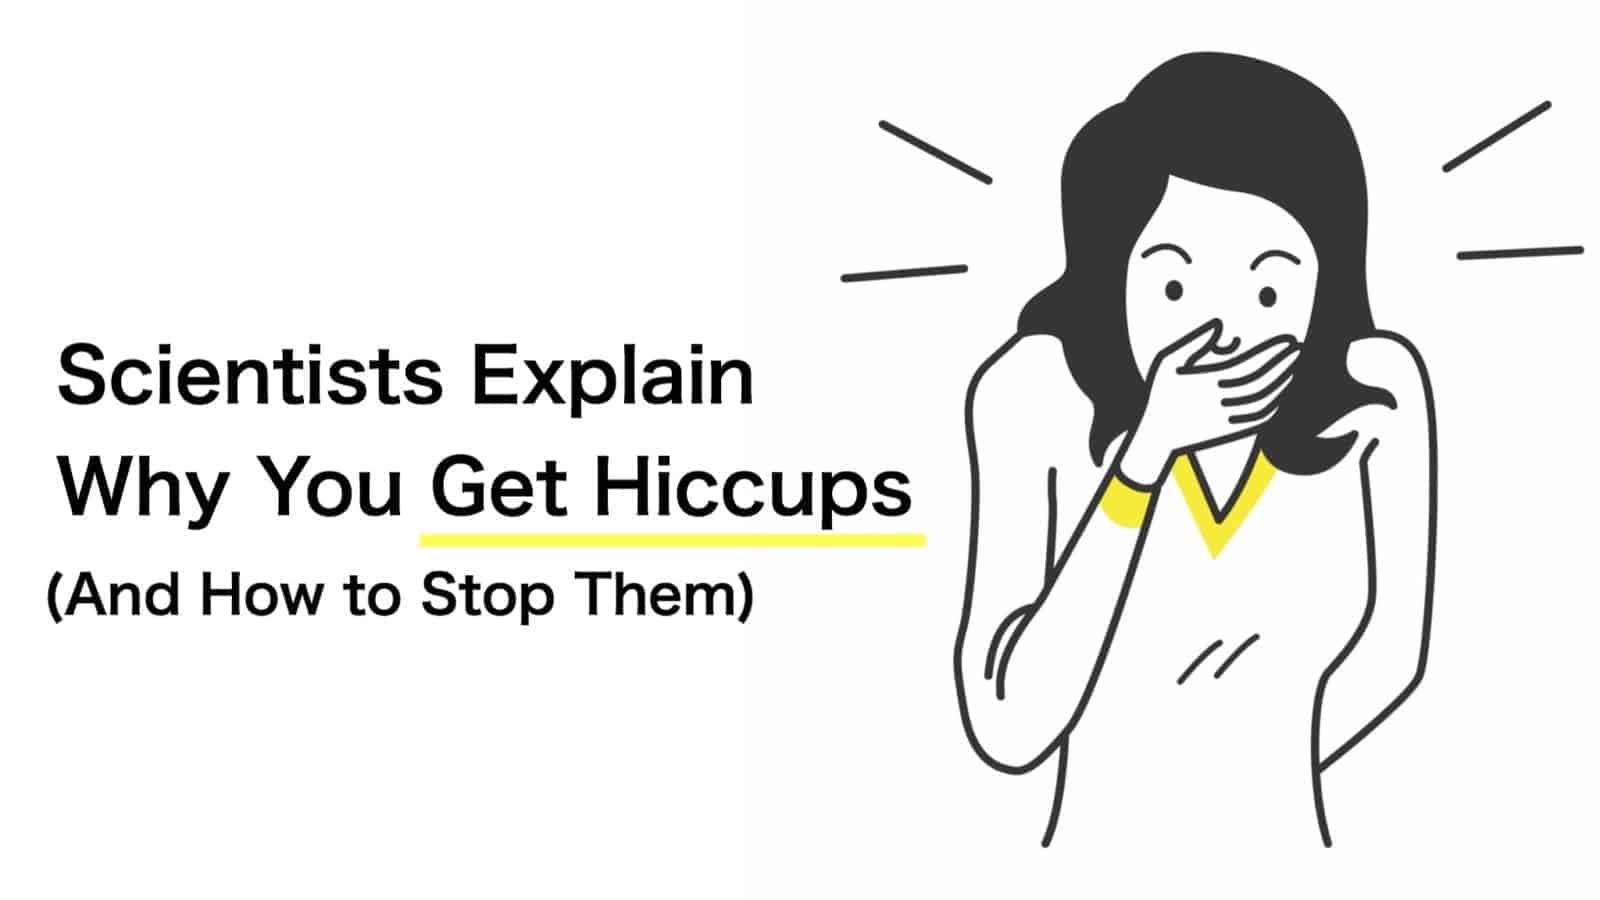 Scientists Explain Why You Get Hiccups (And How to Stop Them)